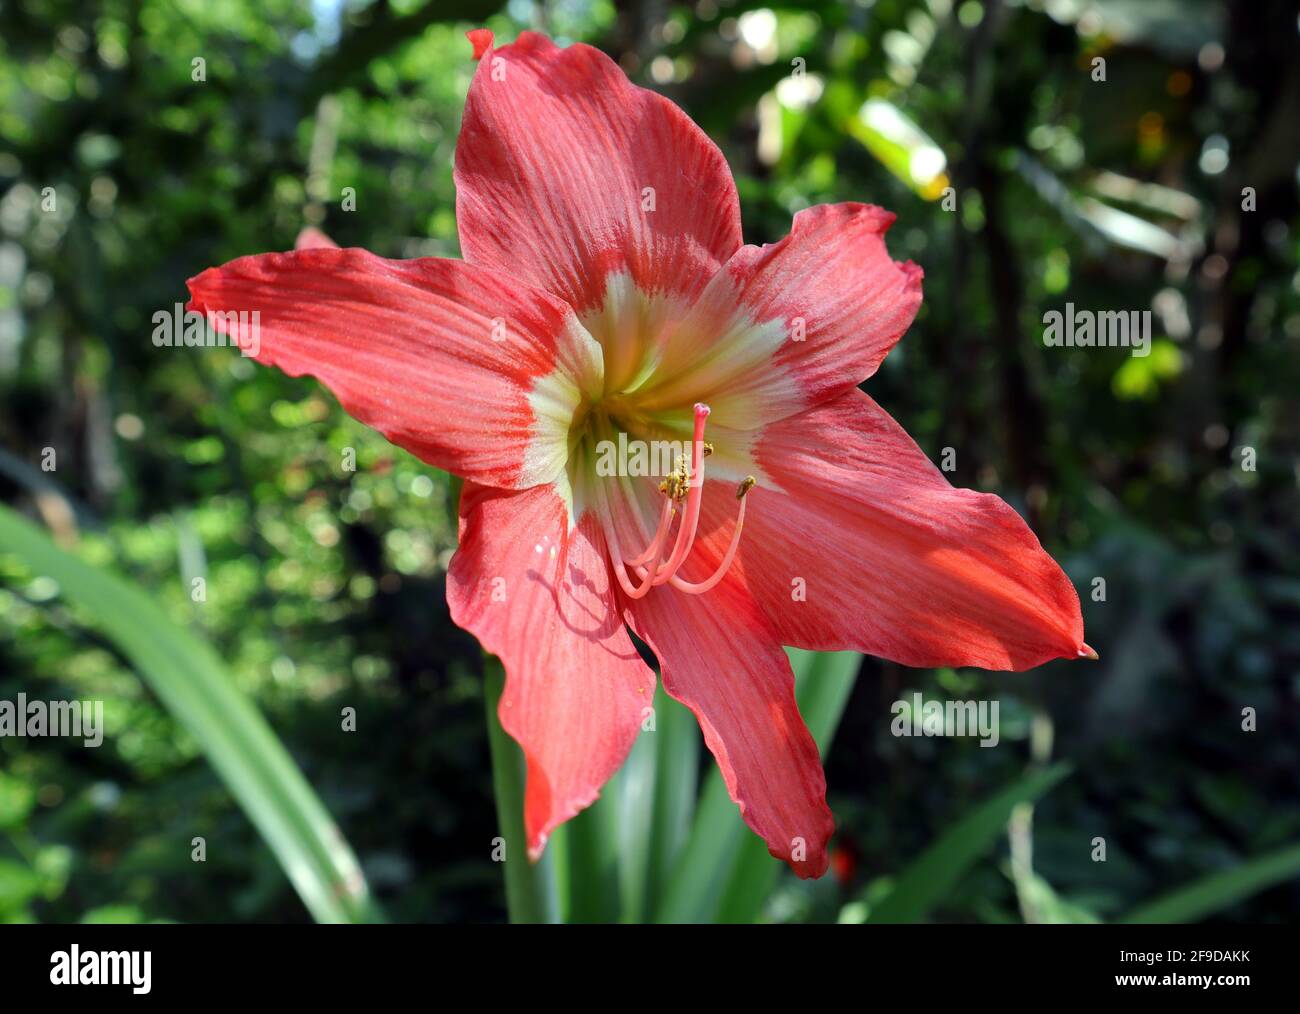 Side angle view of a large red wild onion flower in the garden Stock Photo